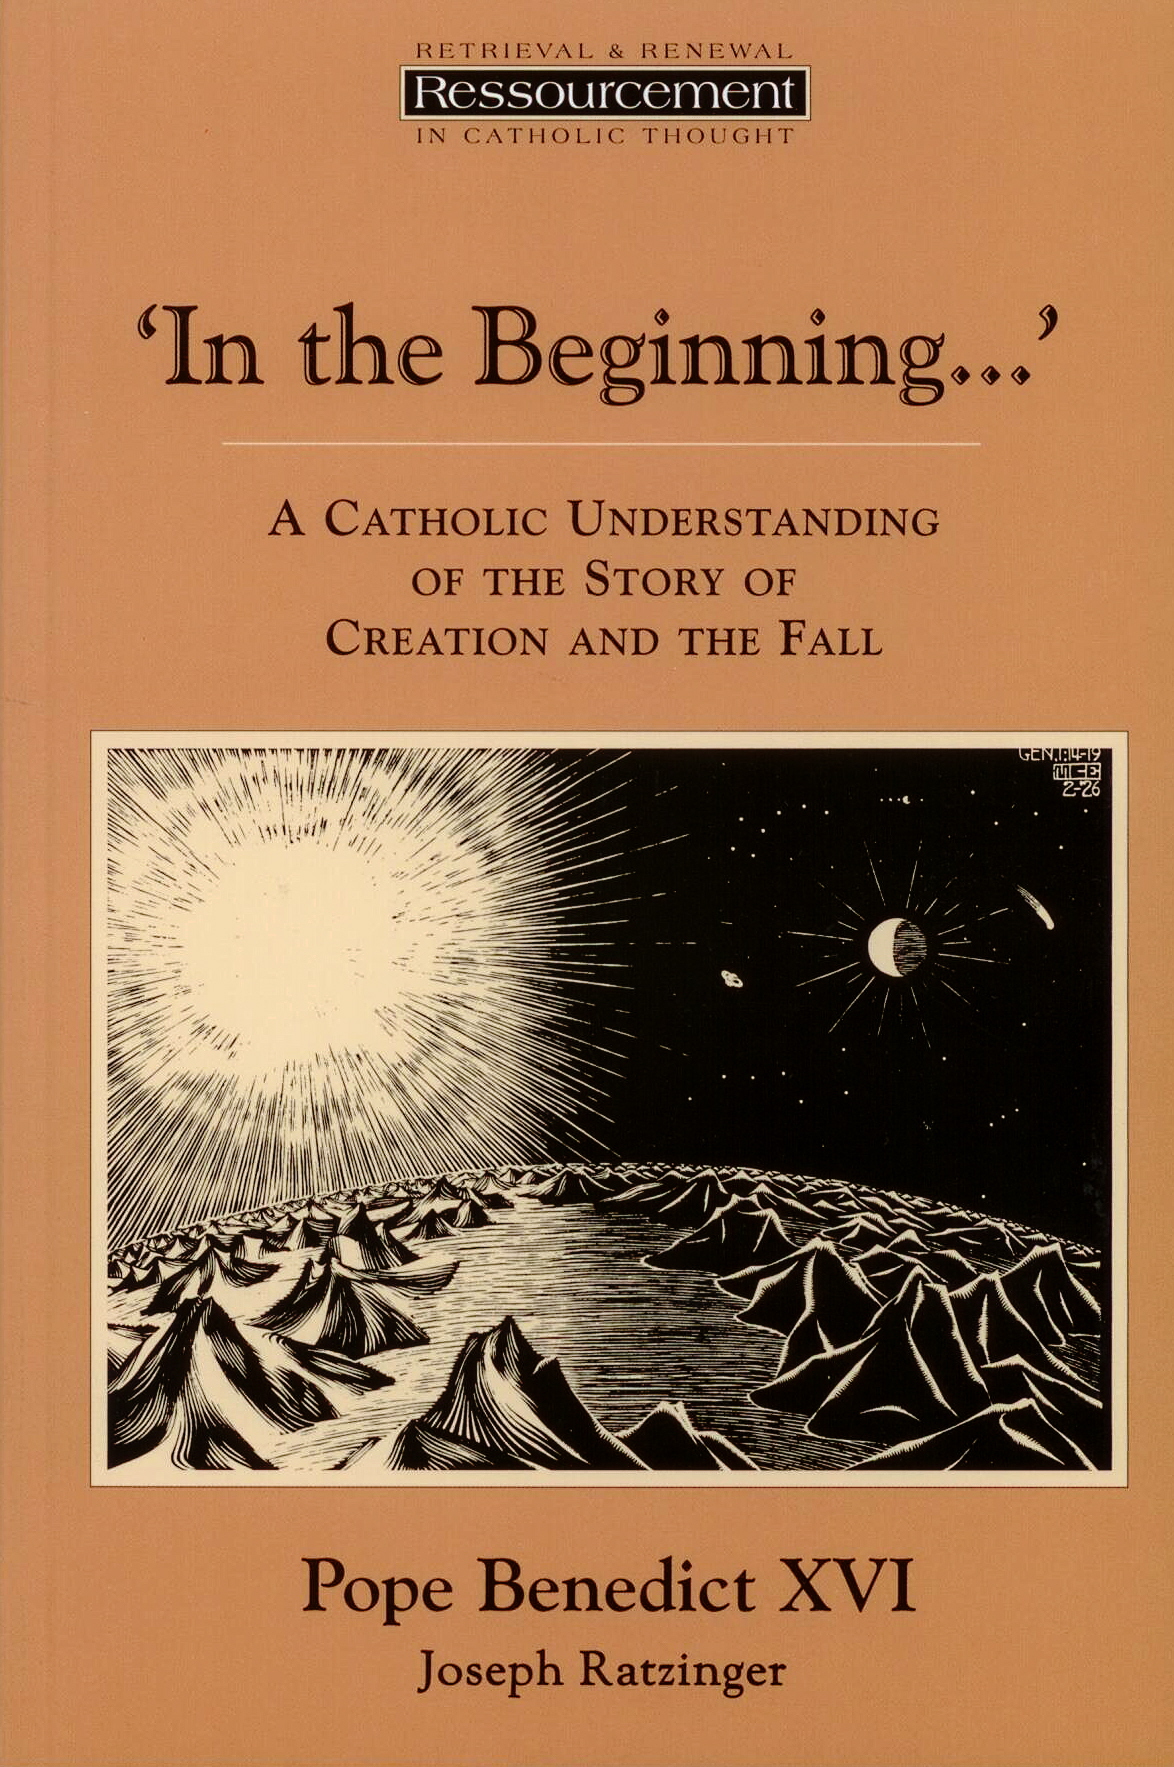 In The Beginning by Pope Benedict XVI